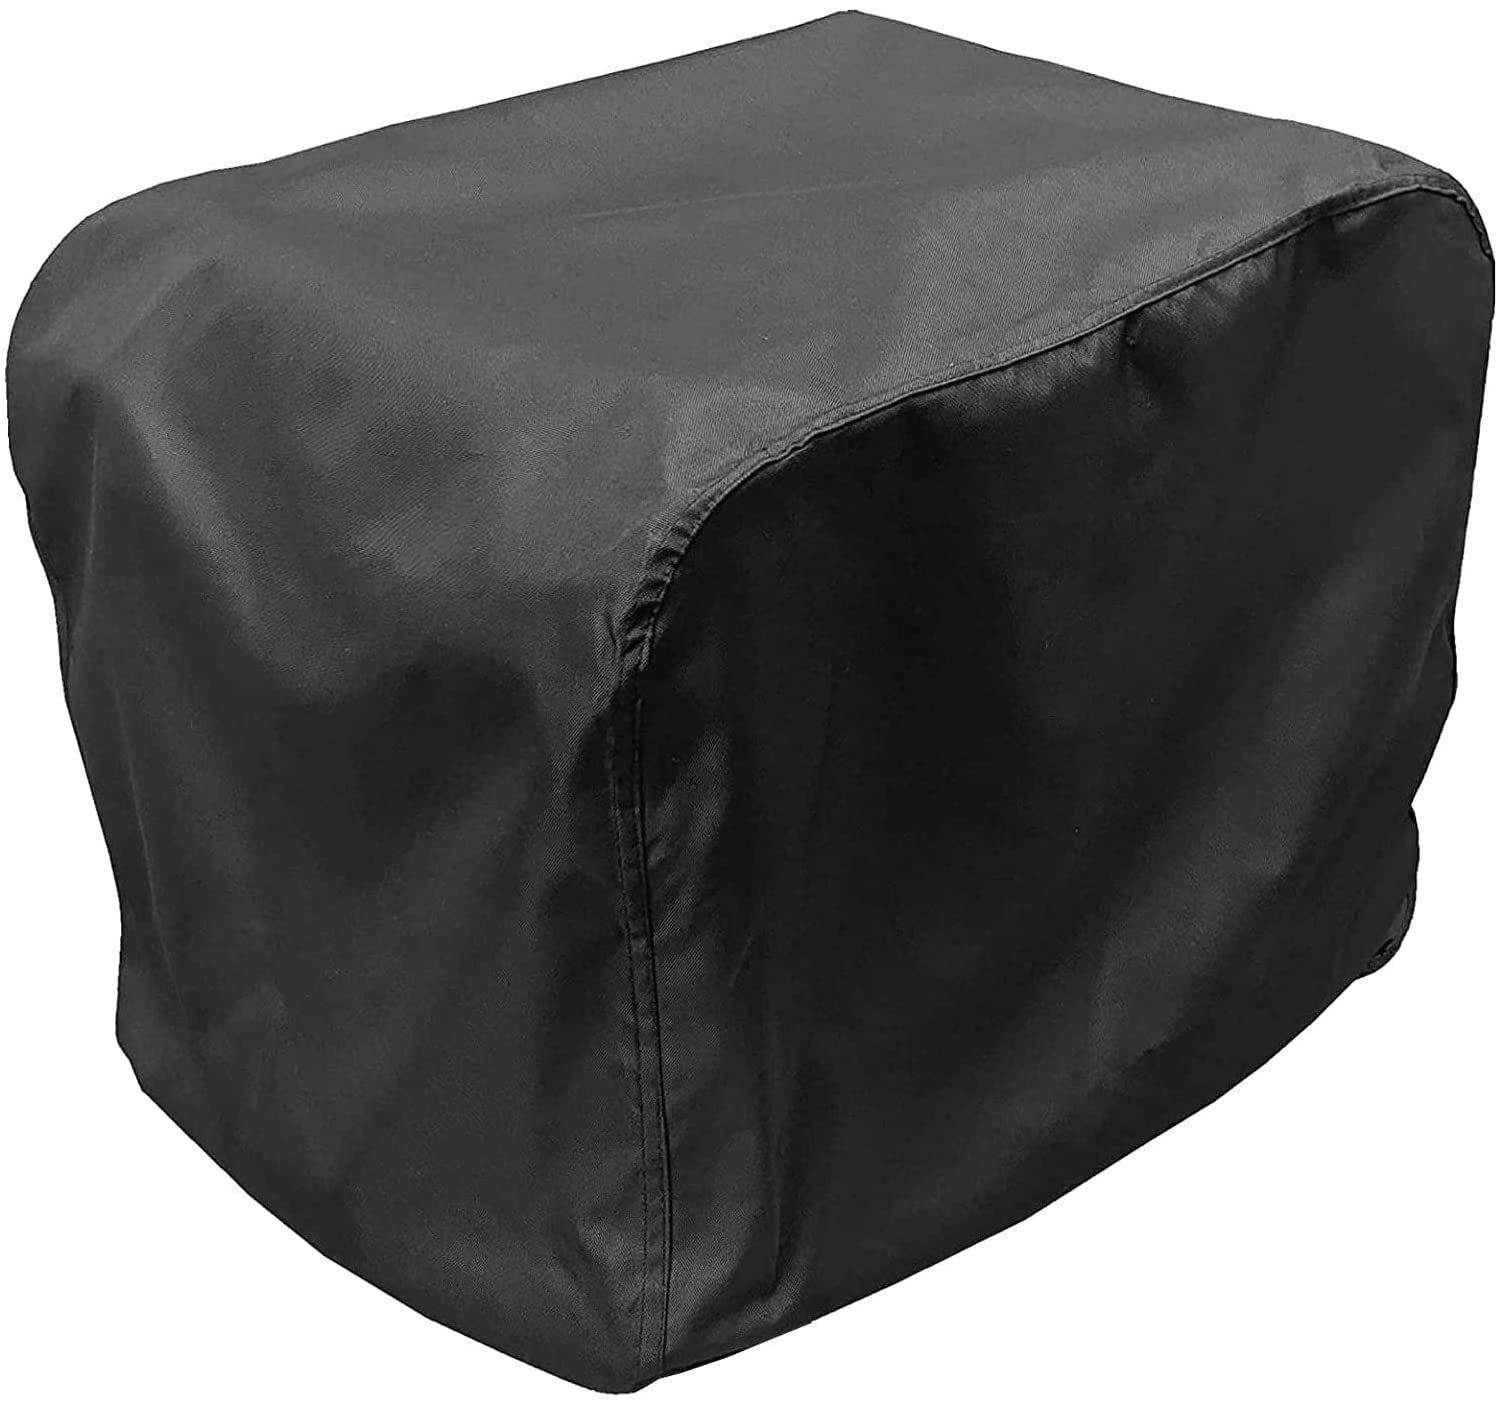 Adamoss generator cover Waterproof, Heavy Duty Thicken 600D Polyester with Elastic Drawstring, WeatherUV Resistant generator cover for U